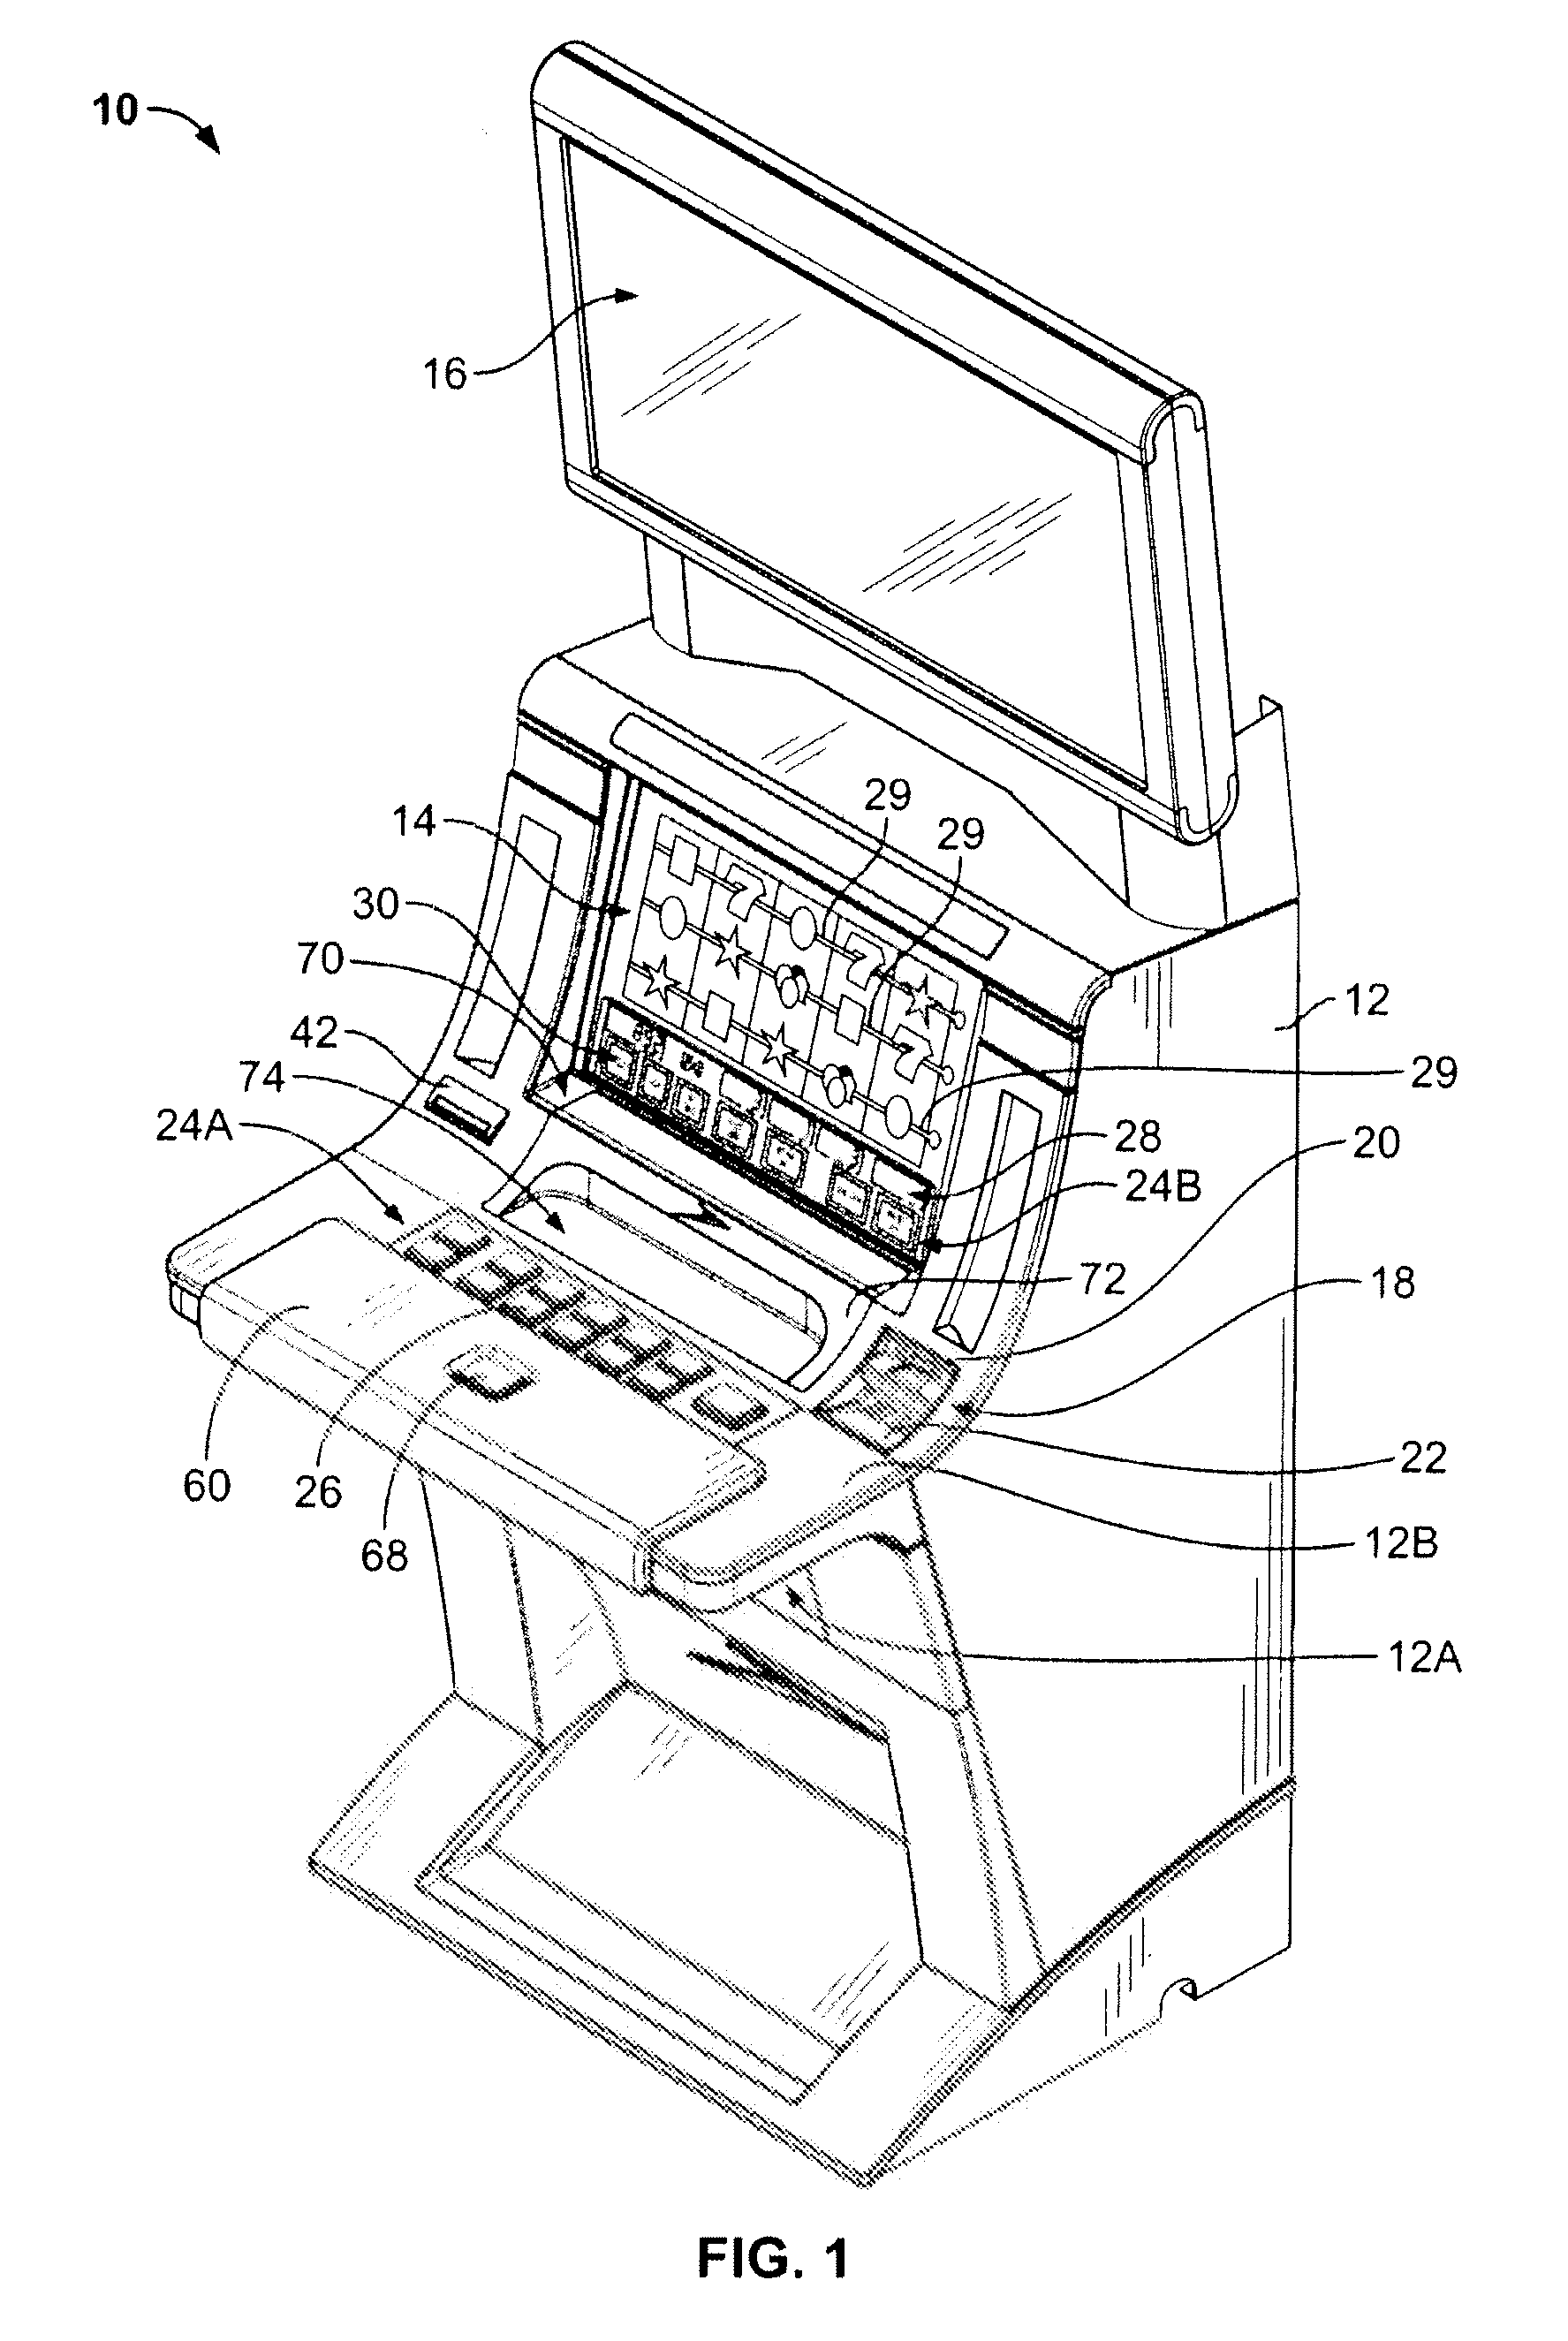 Insert having storage space for a convertible area of an electronic gaming machine